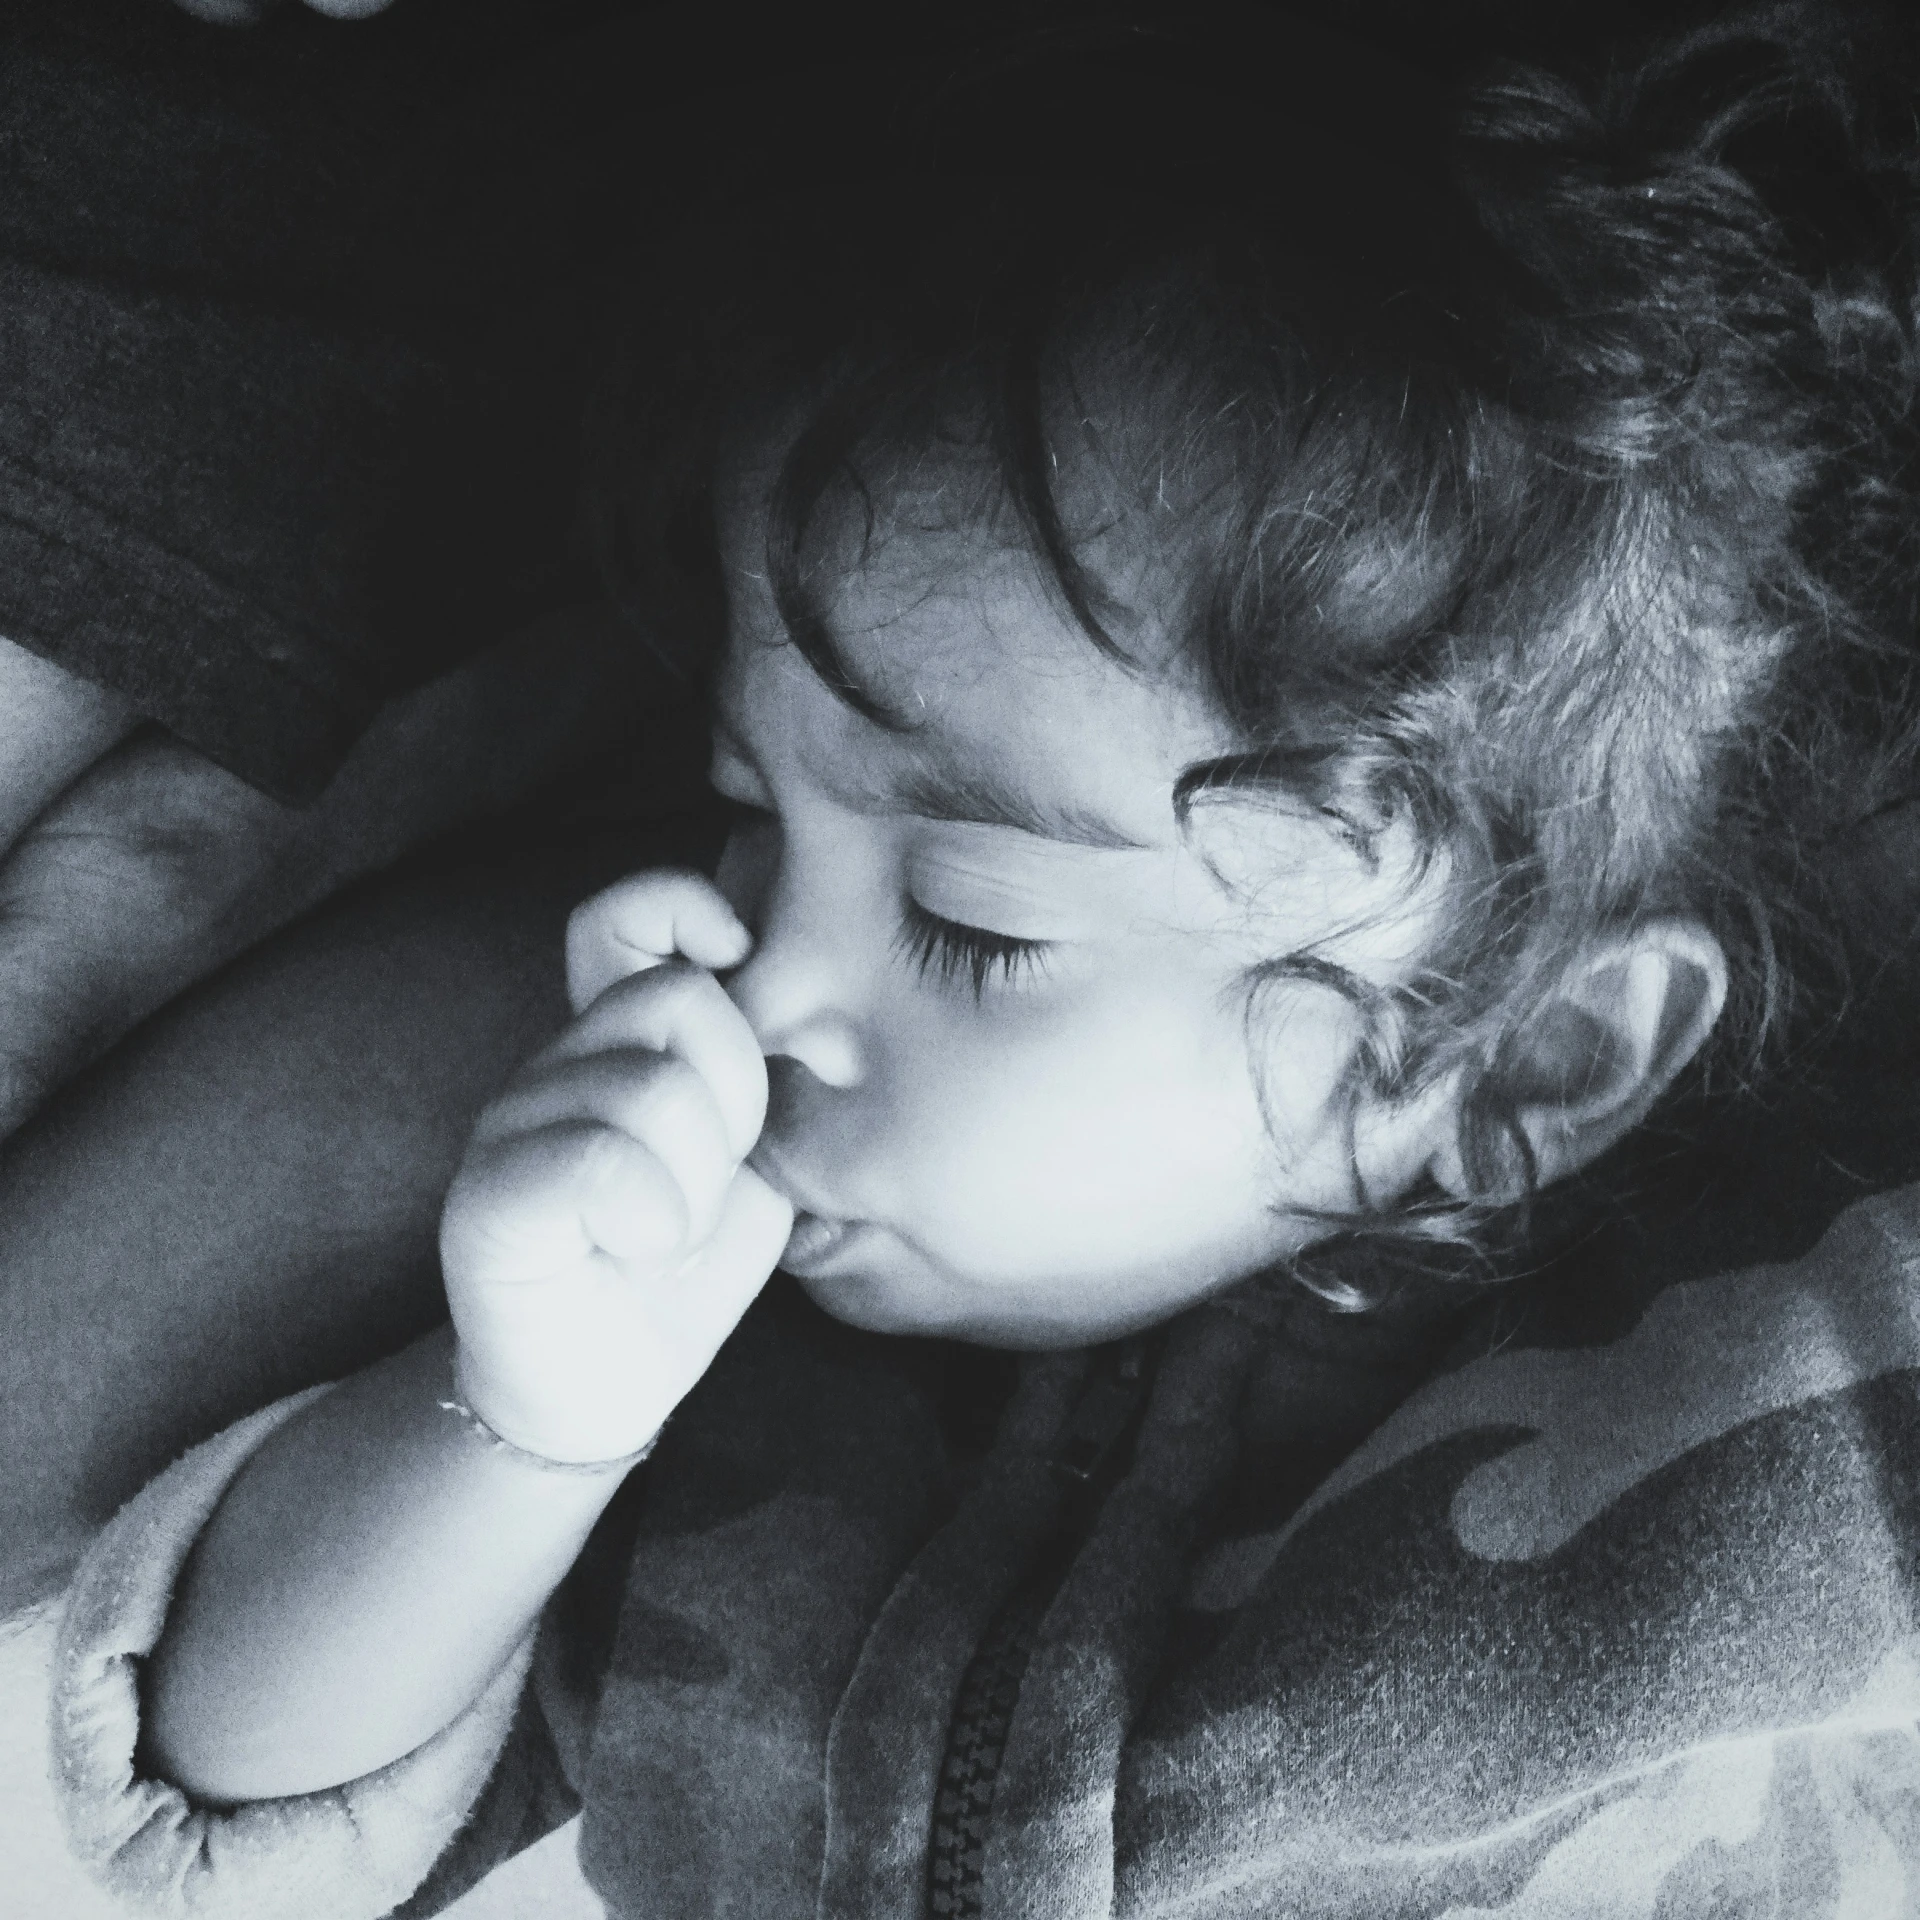 a little girl is laying down with her hands in her mouth